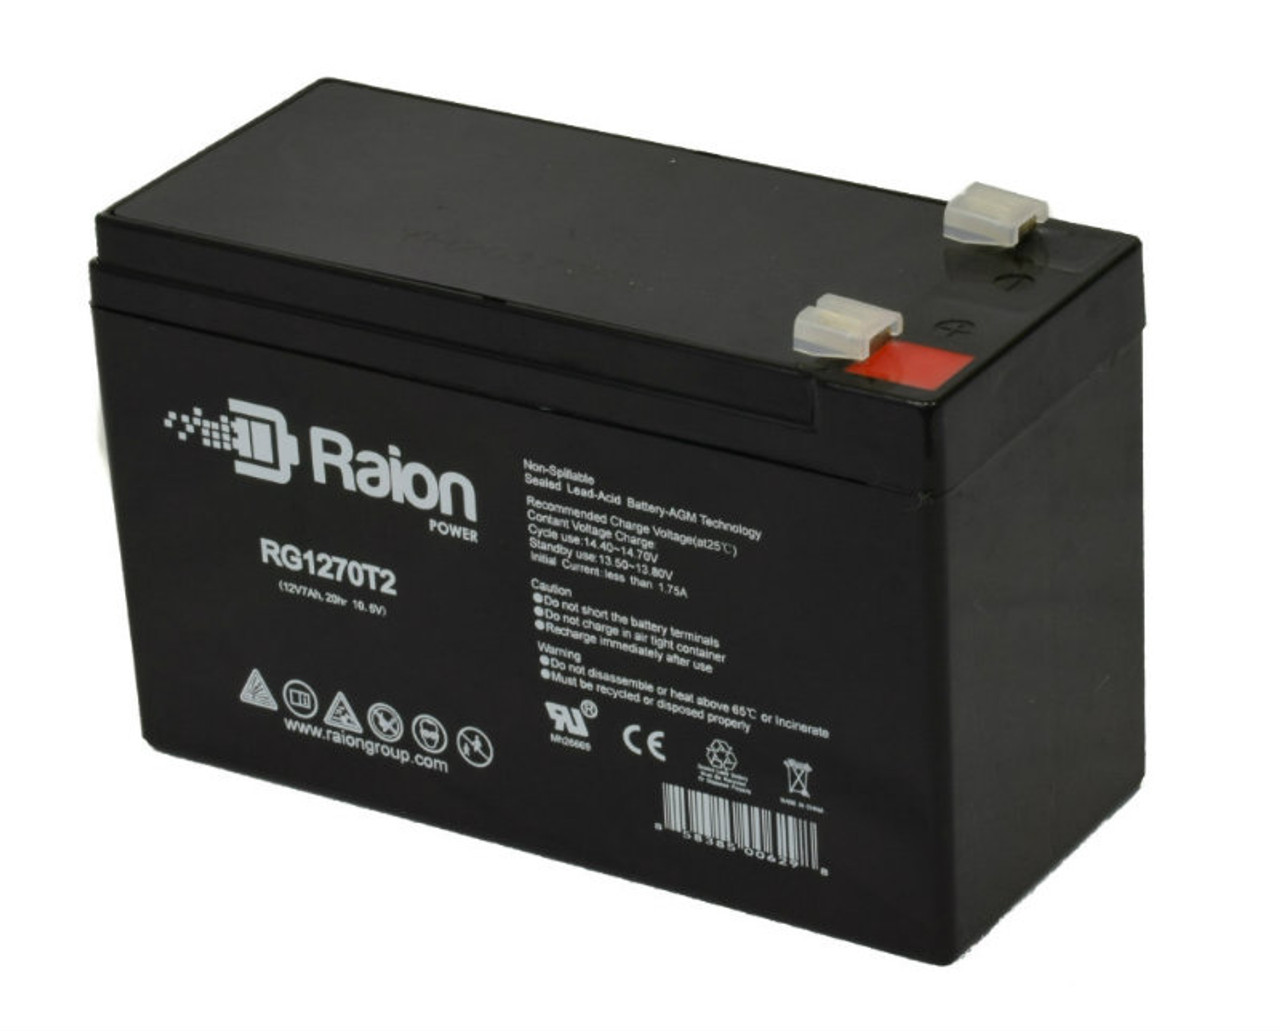 Raion Power RG1270T2 12V 7Ah Rechargeable Battery for Wing ES 7-12vds